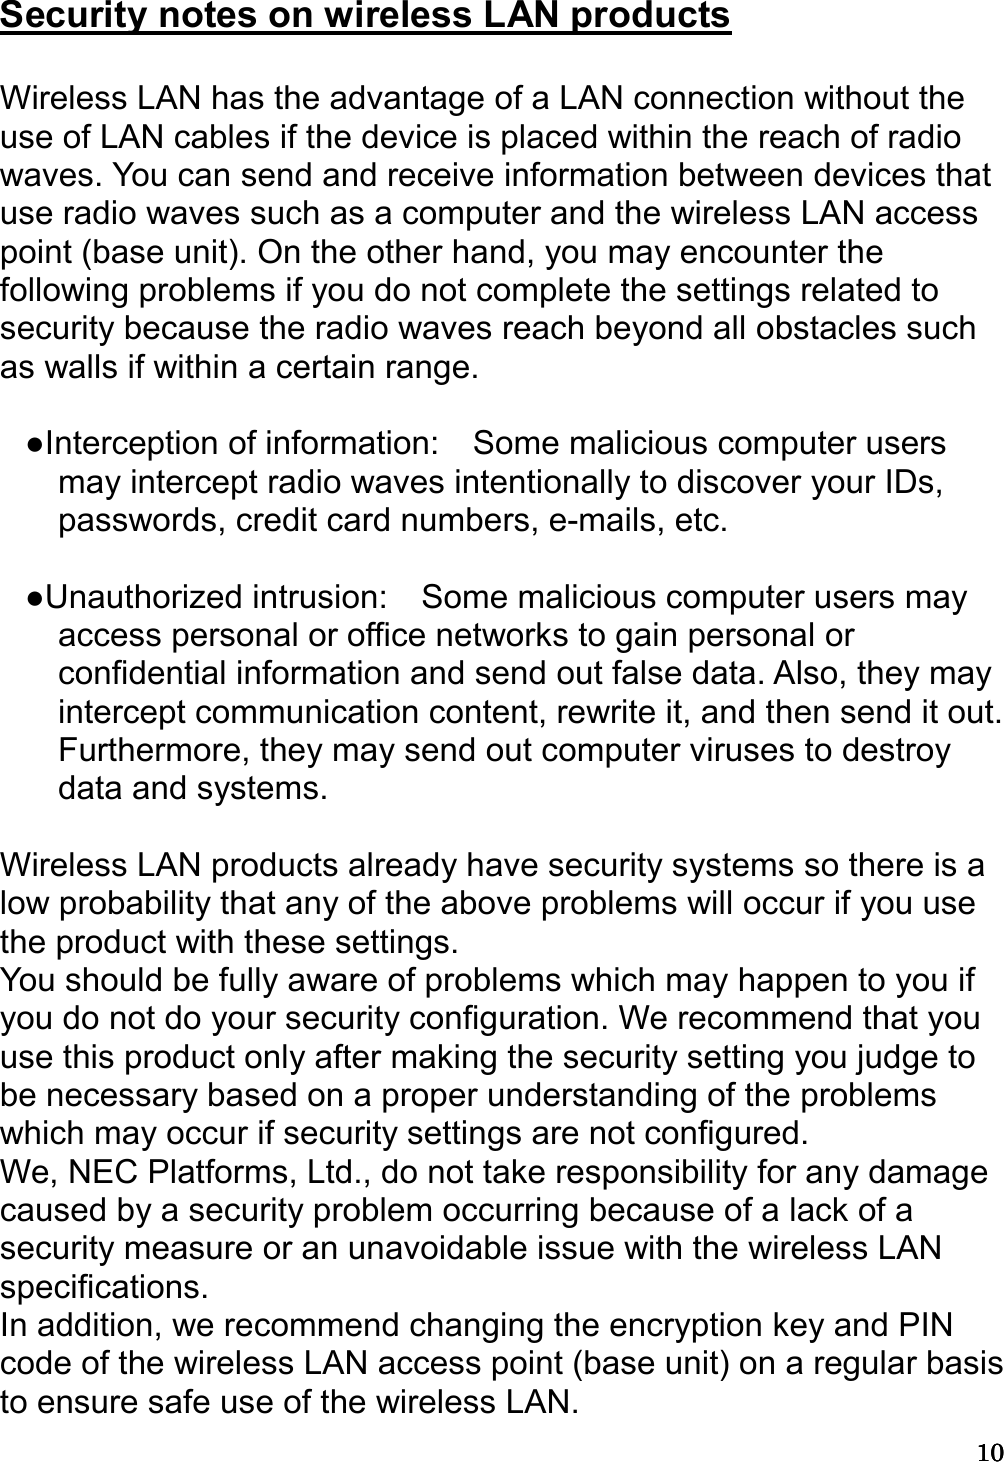 10101010   Security notes on wireless LAN products  Wireless LAN has the advantage of a LAN connection without the use of LAN cables if the device is placed within the reach of radio waves. You can send and receive information between devices that use radio waves such as a computer and the wireless LAN access point (base unit). On the other hand, you may encounter the following problems if you do not complete the settings related to security because the radio waves reach beyond all obstacles such as walls if within a certain range.  ●Interception of information:    Some malicious computer users may intercept radio waves intentionally to discover your IDs, passwords, credit card numbers, e-mails, etc.  ●Unauthorized intrusion:    Some malicious computer users may access personal or office networks to gain personal or confidential information and send out false data. Also, they may intercept communication content, rewrite it, and then send it out. Furthermore, they may send out computer viruses to destroy data and systems.  Wireless LAN products already have security systems so there is a low probability that any of the above problems will occur if you use the product with these settings. You should be fully aware of problems which may happen to you if you do not do your security configuration. We recommend that you use this product only after making the security setting you judge to be necessary based on a proper understanding of the problems which may occur if security settings are not configured. We, NEC Platforms, Ltd., do not take responsibility for any damage caused by a security problem occurring because of a lack of a security measure or an unavoidable issue with the wireless LAN specifications. In addition, we recommend changing the encryption key and PIN code of the wireless LAN access point (base unit) on a regular basis to ensure safe use of the wireless LAN.   